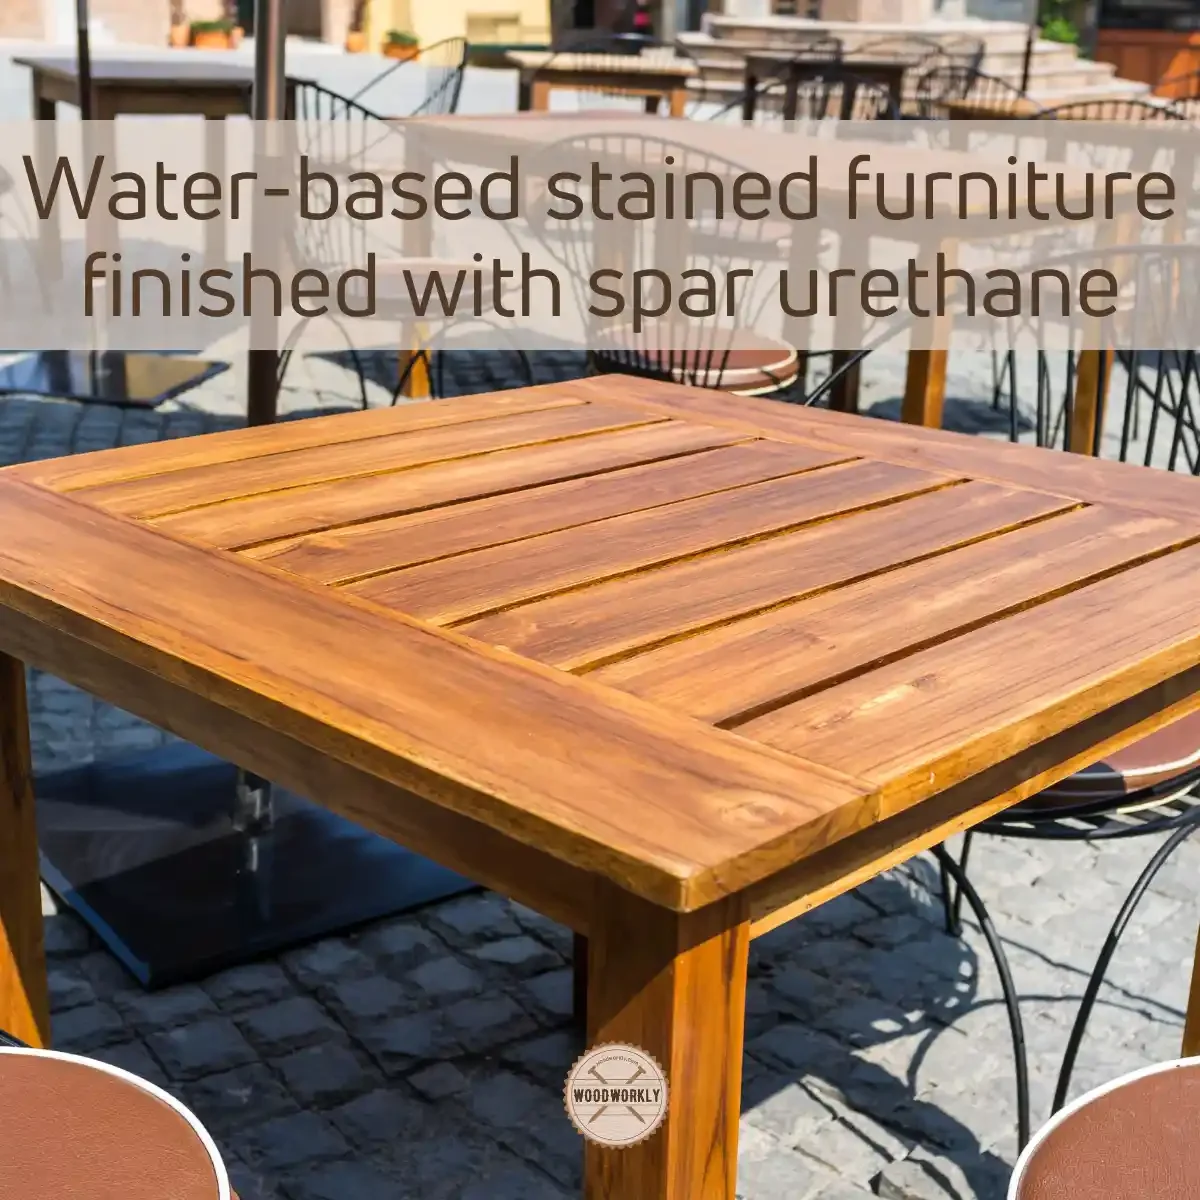 Water-based stained furniture finished with spar urethane